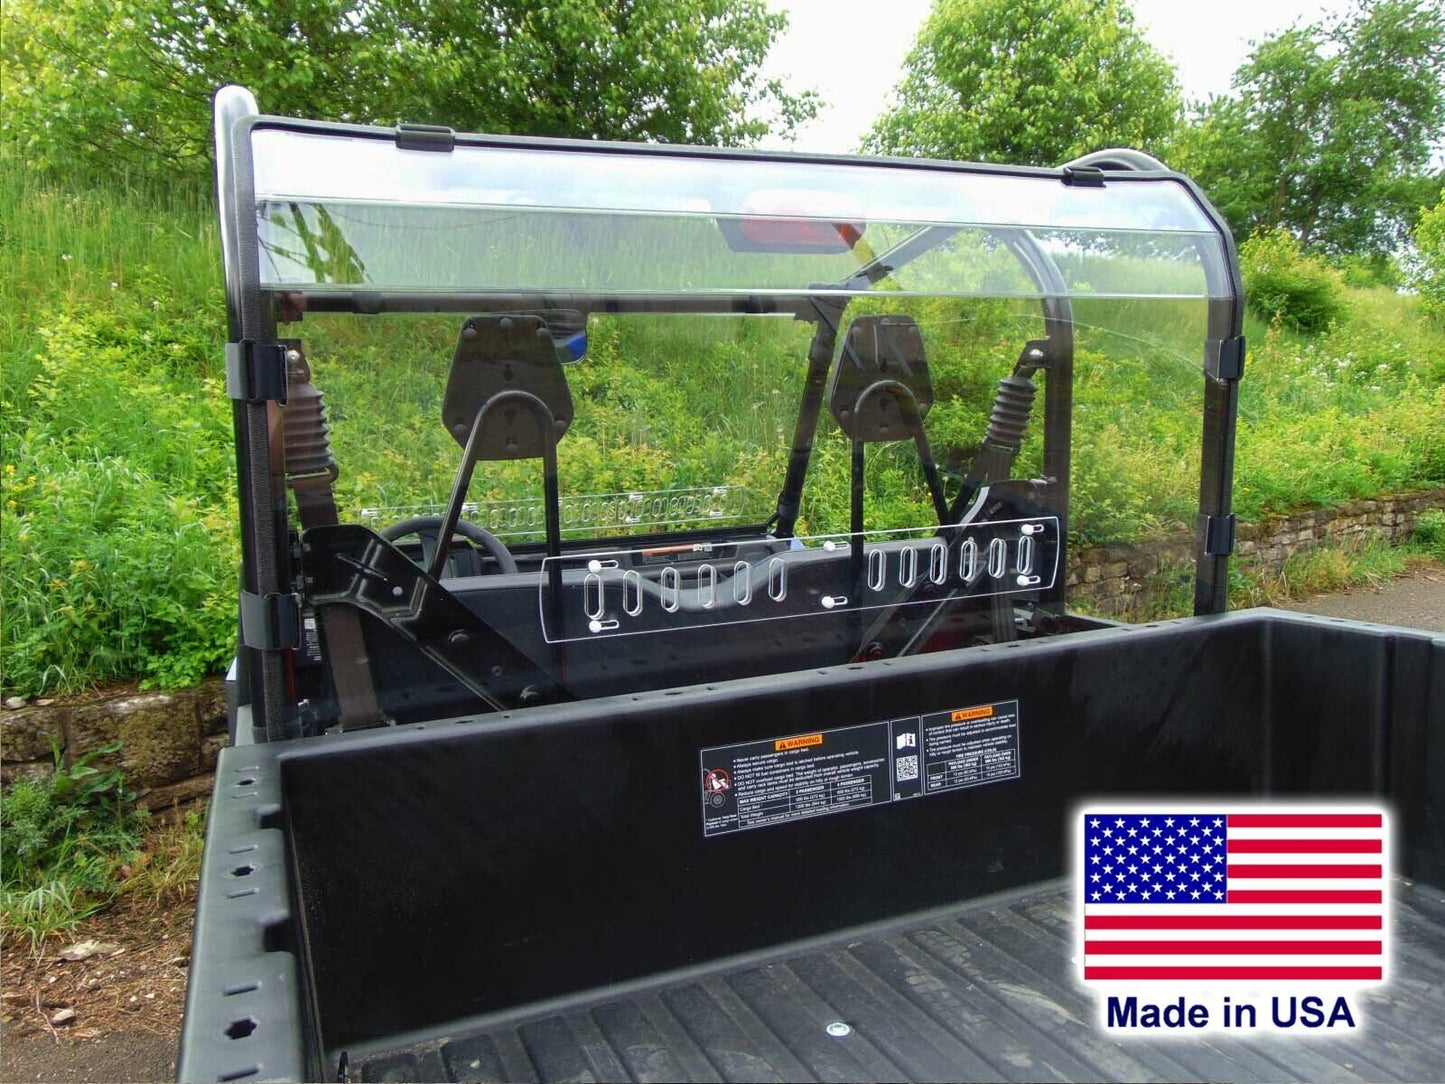 HARD REAR WINDOW for Arctic Cat Stampede - Polycarbonate - Travels Highway Speed